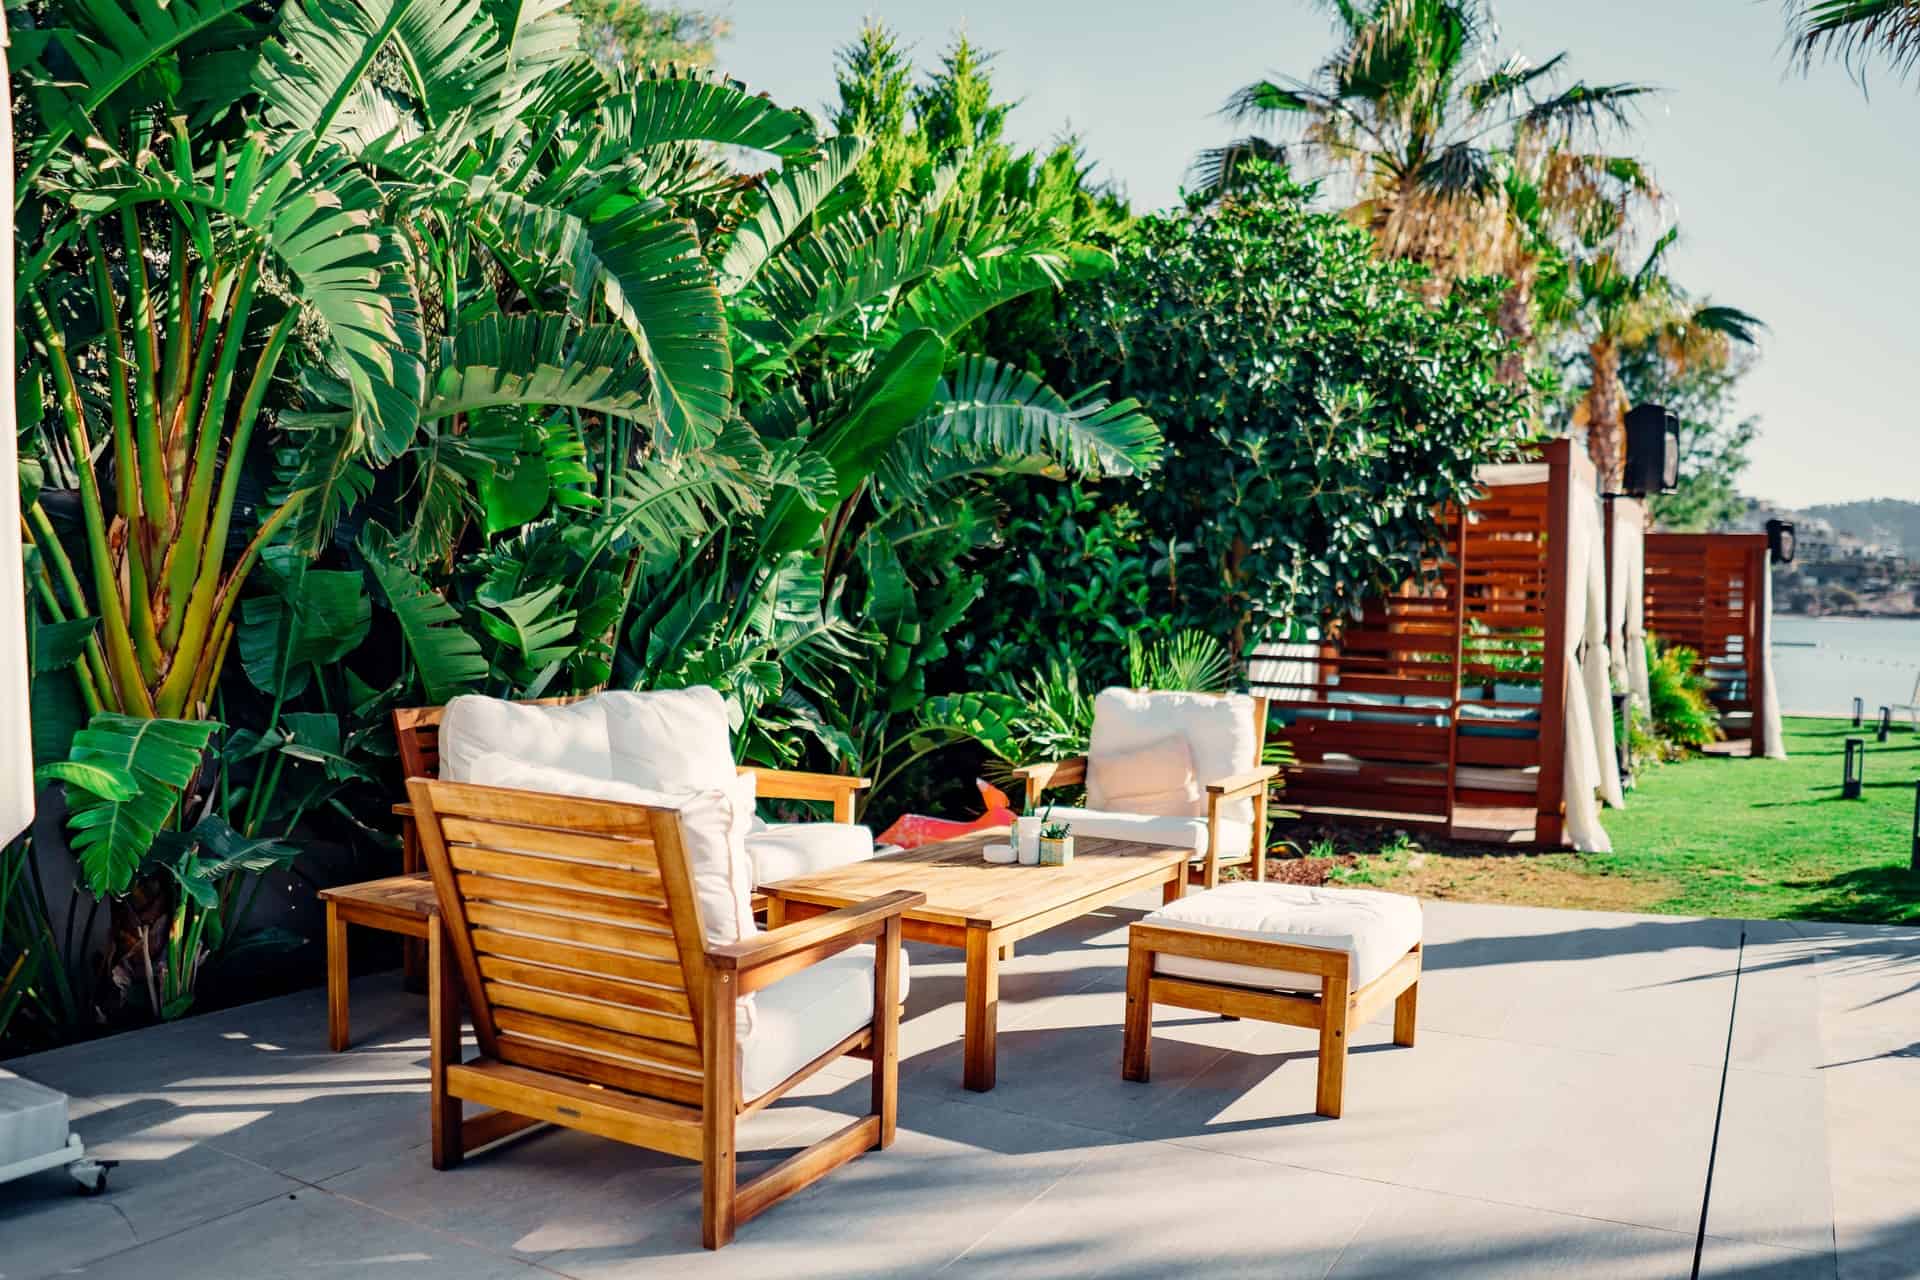 When to buy patio furniture?